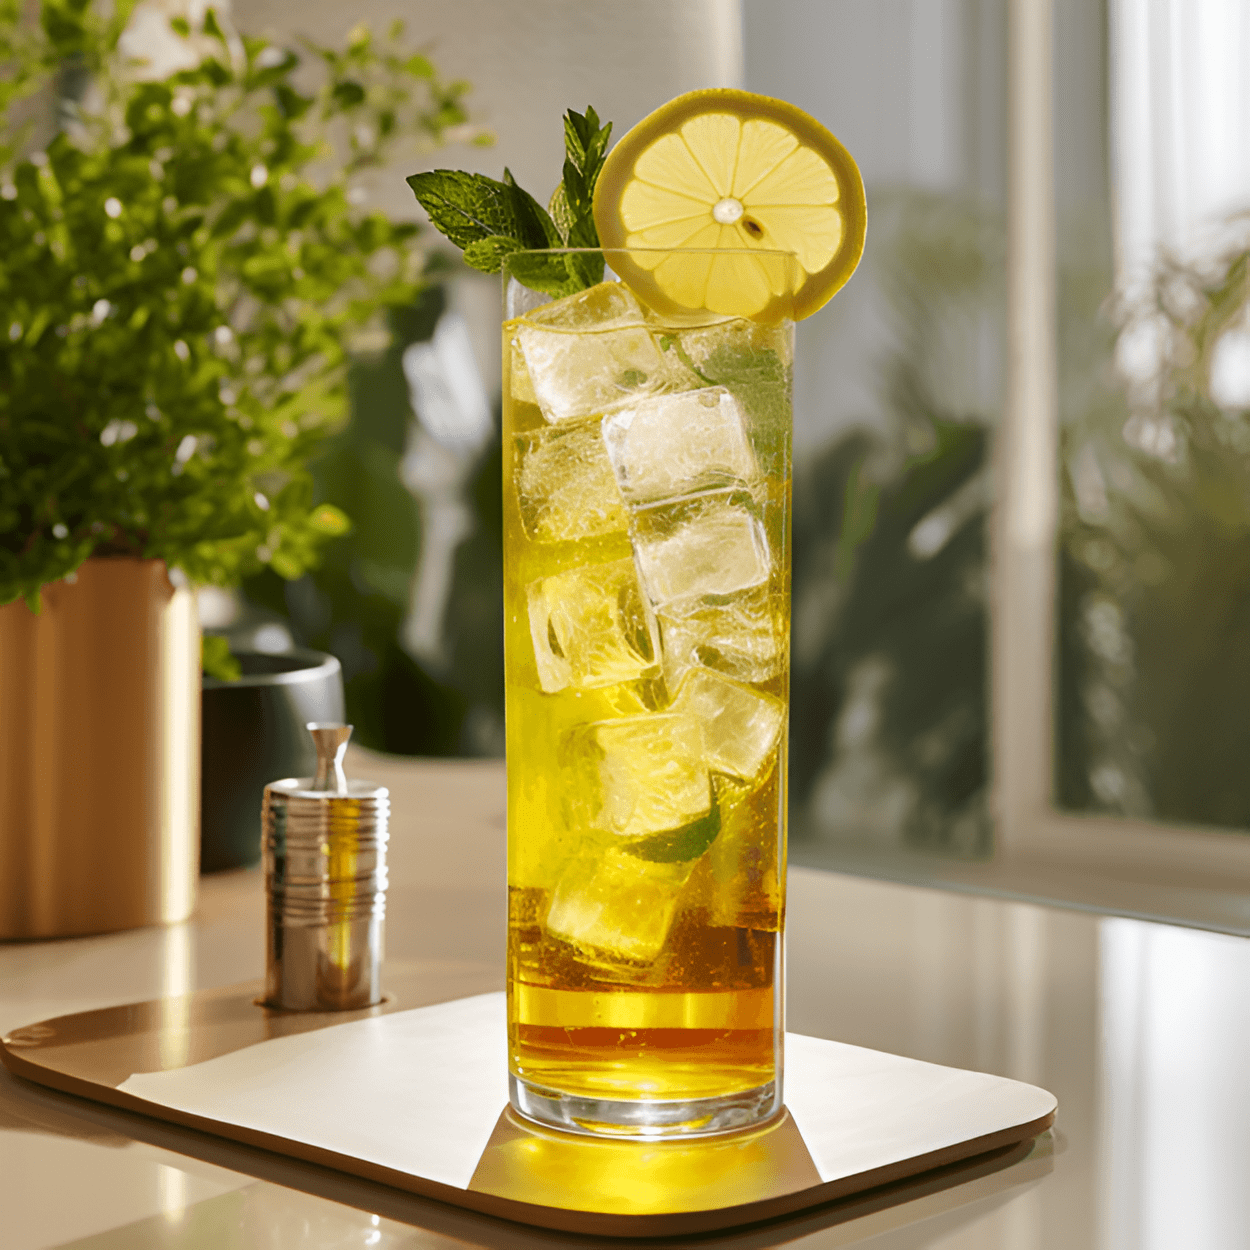 The Green Tea Highball has a light, refreshing taste with a subtle earthiness from the green tea. It's slightly sweet, with a hint of citrus from the lemon, and a gentle effervescence from the soda water.